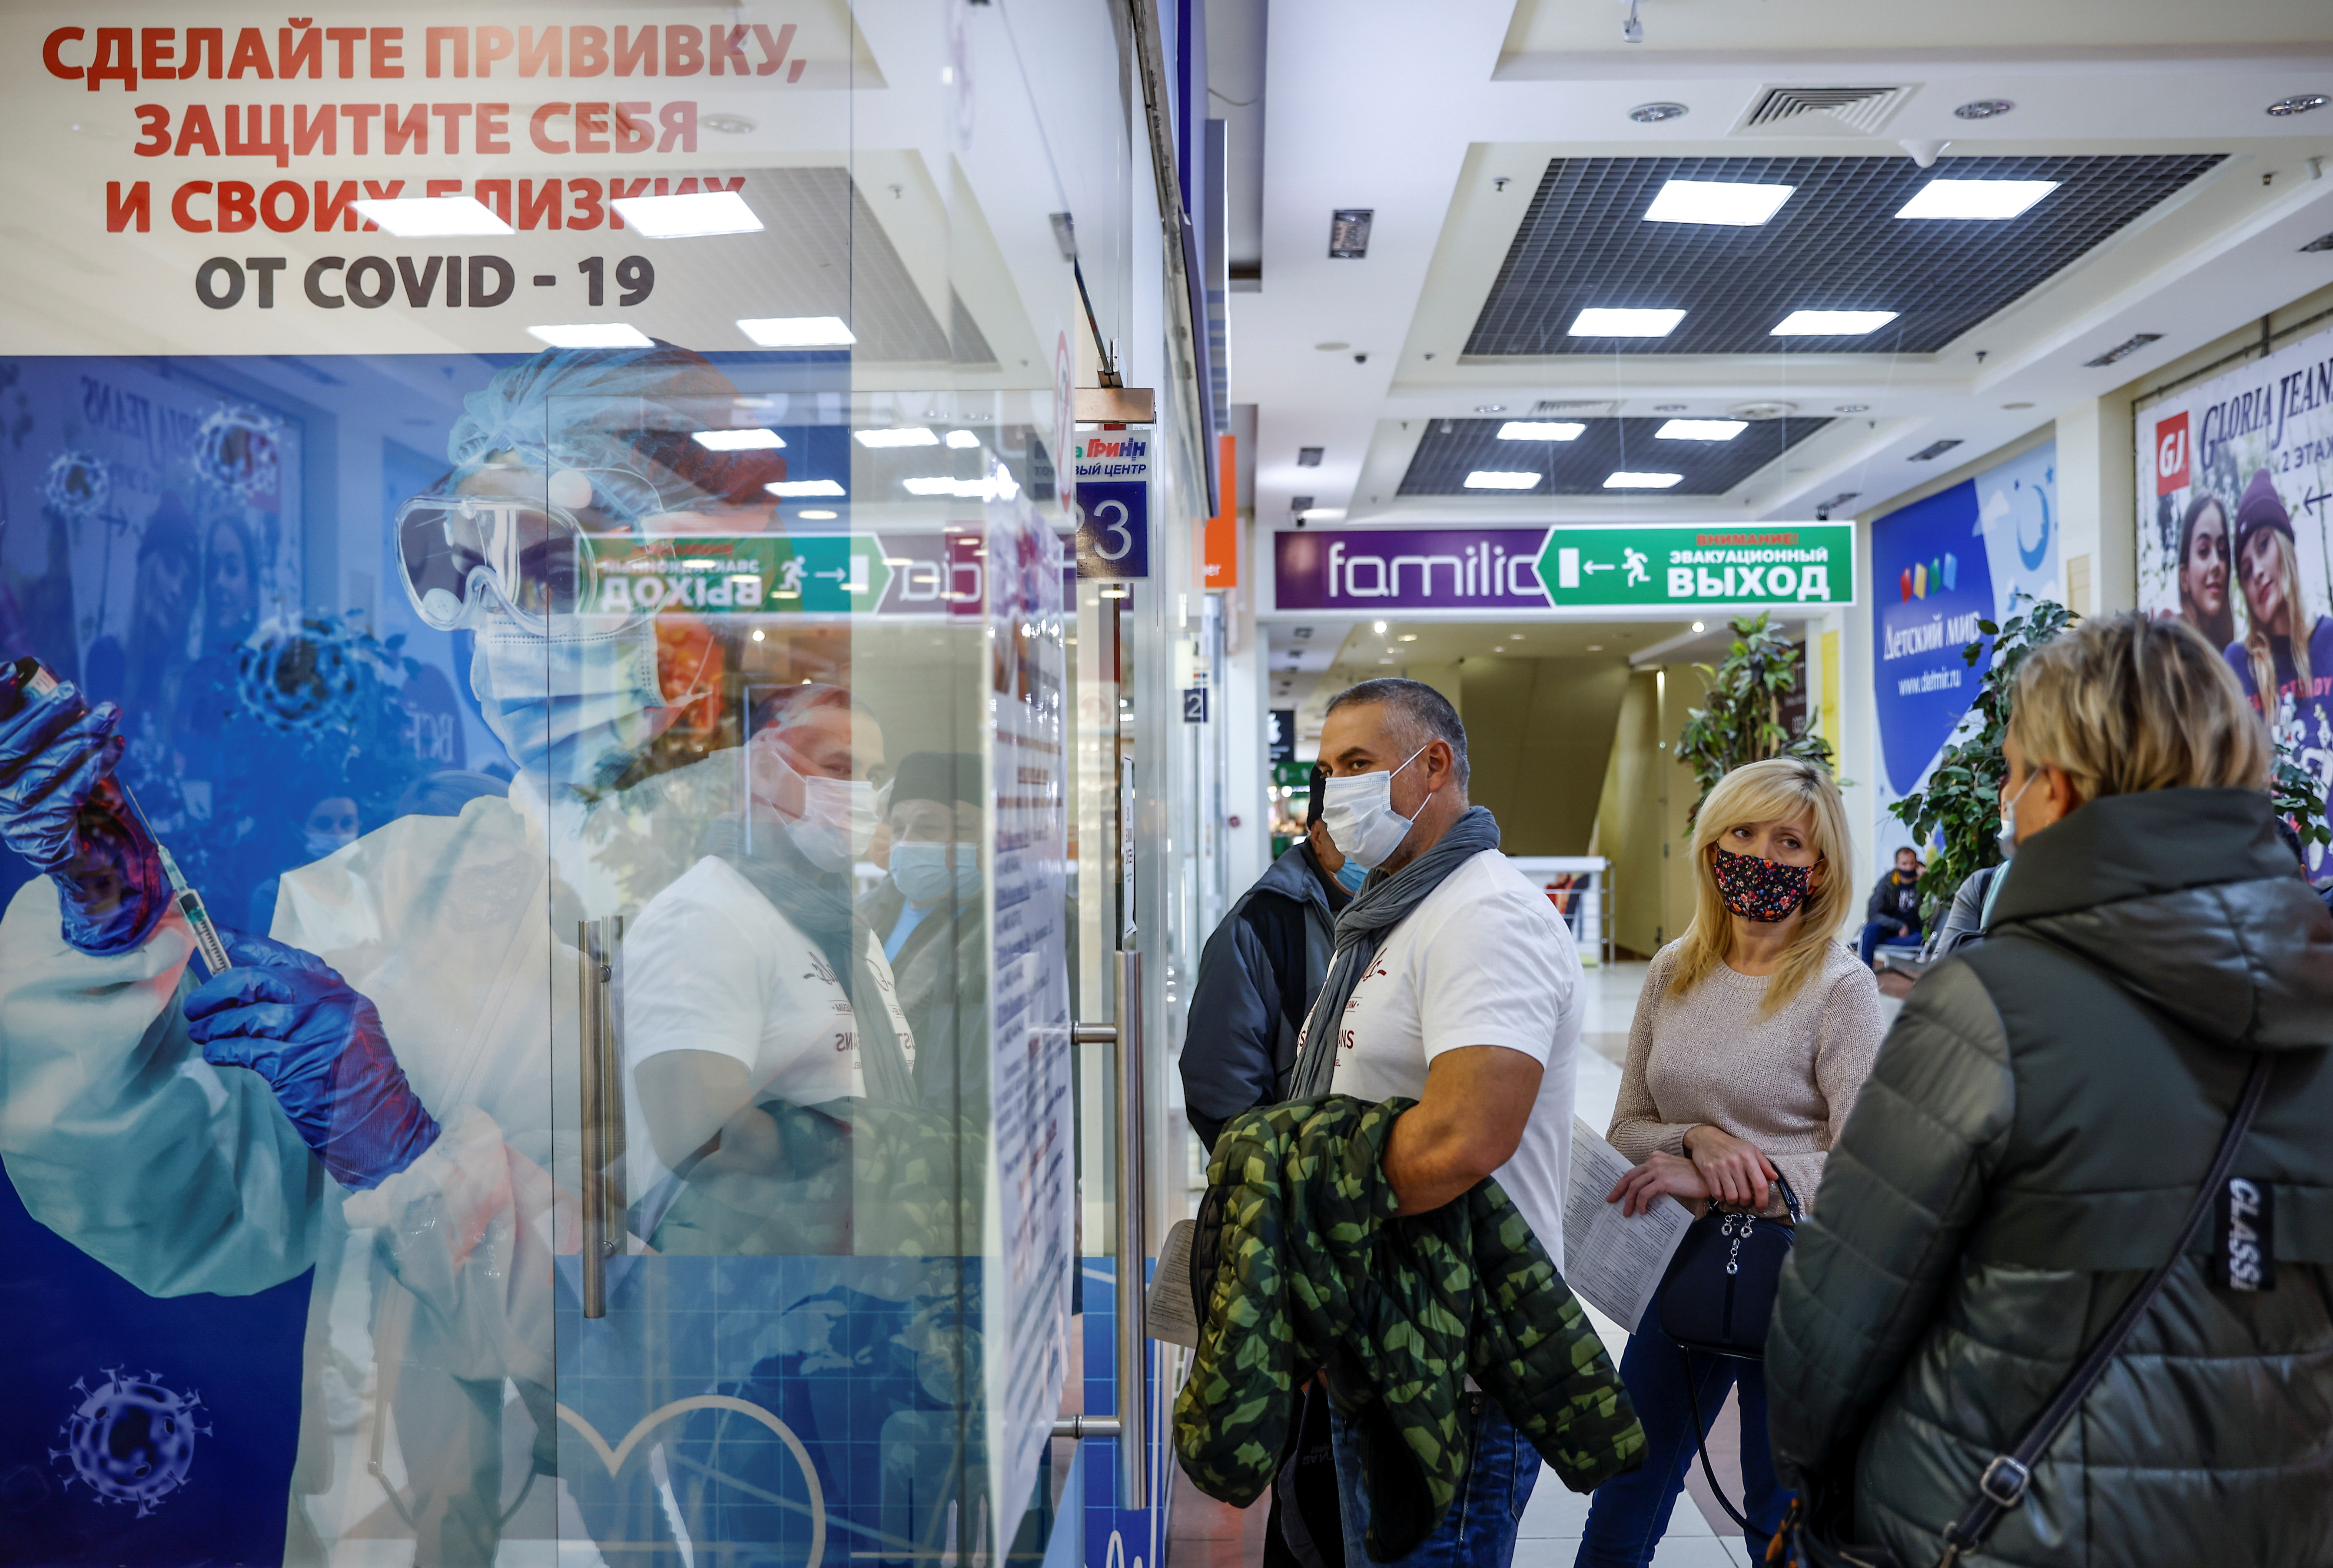 People stand in a line to receive a vaccine against the coronavirus disease (COVID-19) in a vaccination centre located at a shopping mall in Oryol, Russia October 25, 2021. Picture taken October 25, 2021. REUTERS/Maxim Shemetov